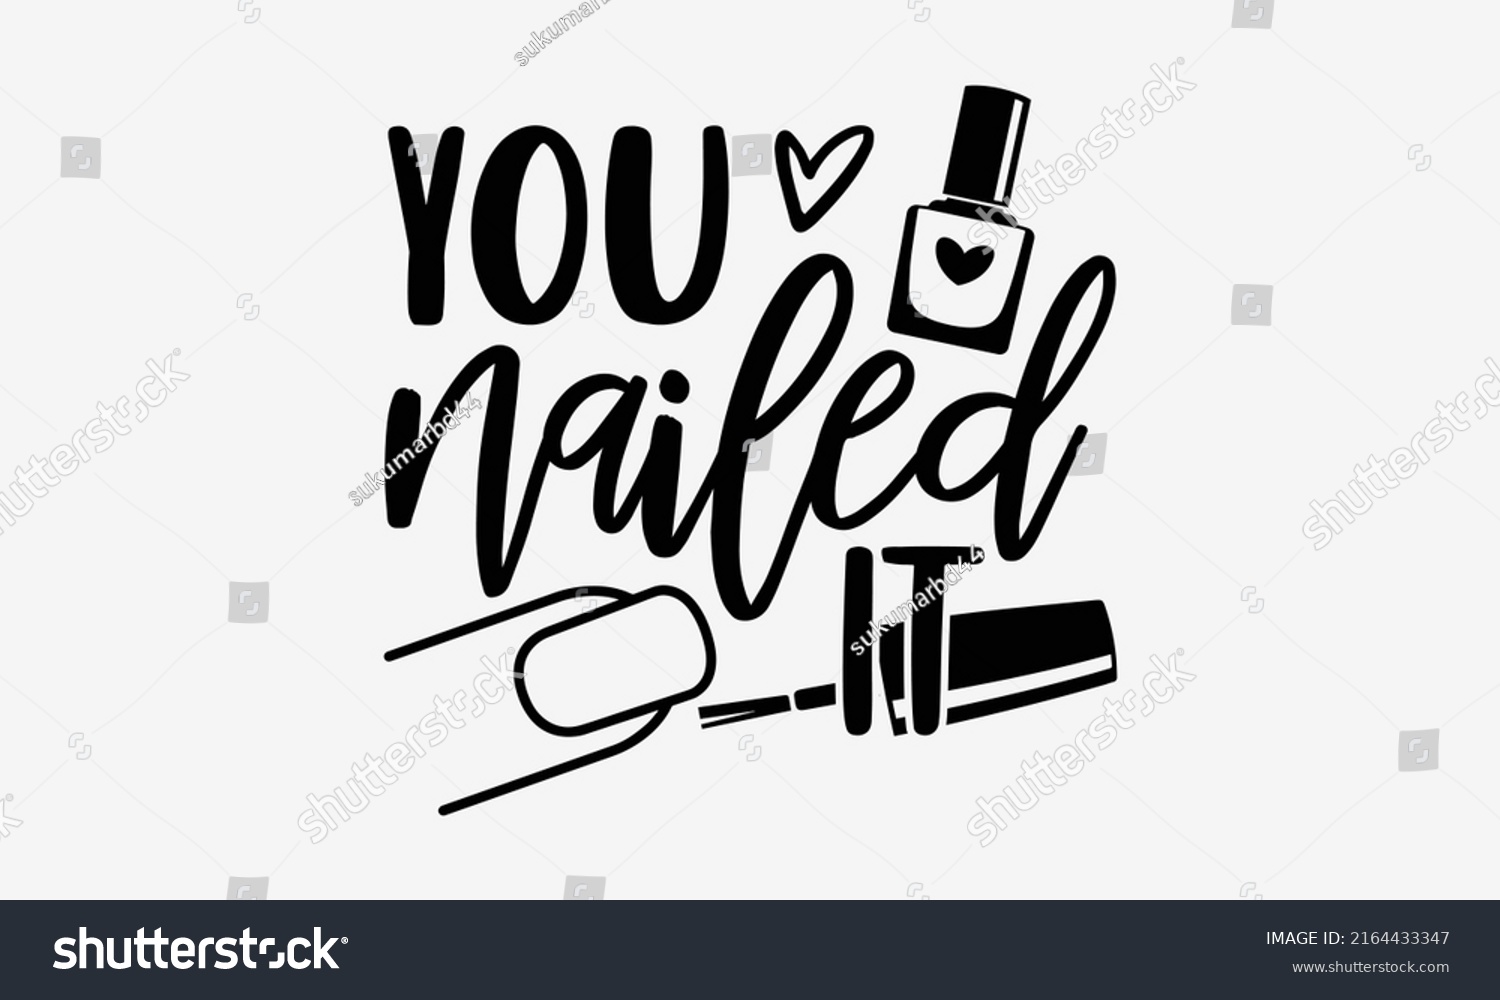 SVG of You nailed it - Nail Tech t shirt design, Hand drawn lettering phrase, Calligraphy graphic design, SVG Files for Cutting Cricut and Silhouette svg